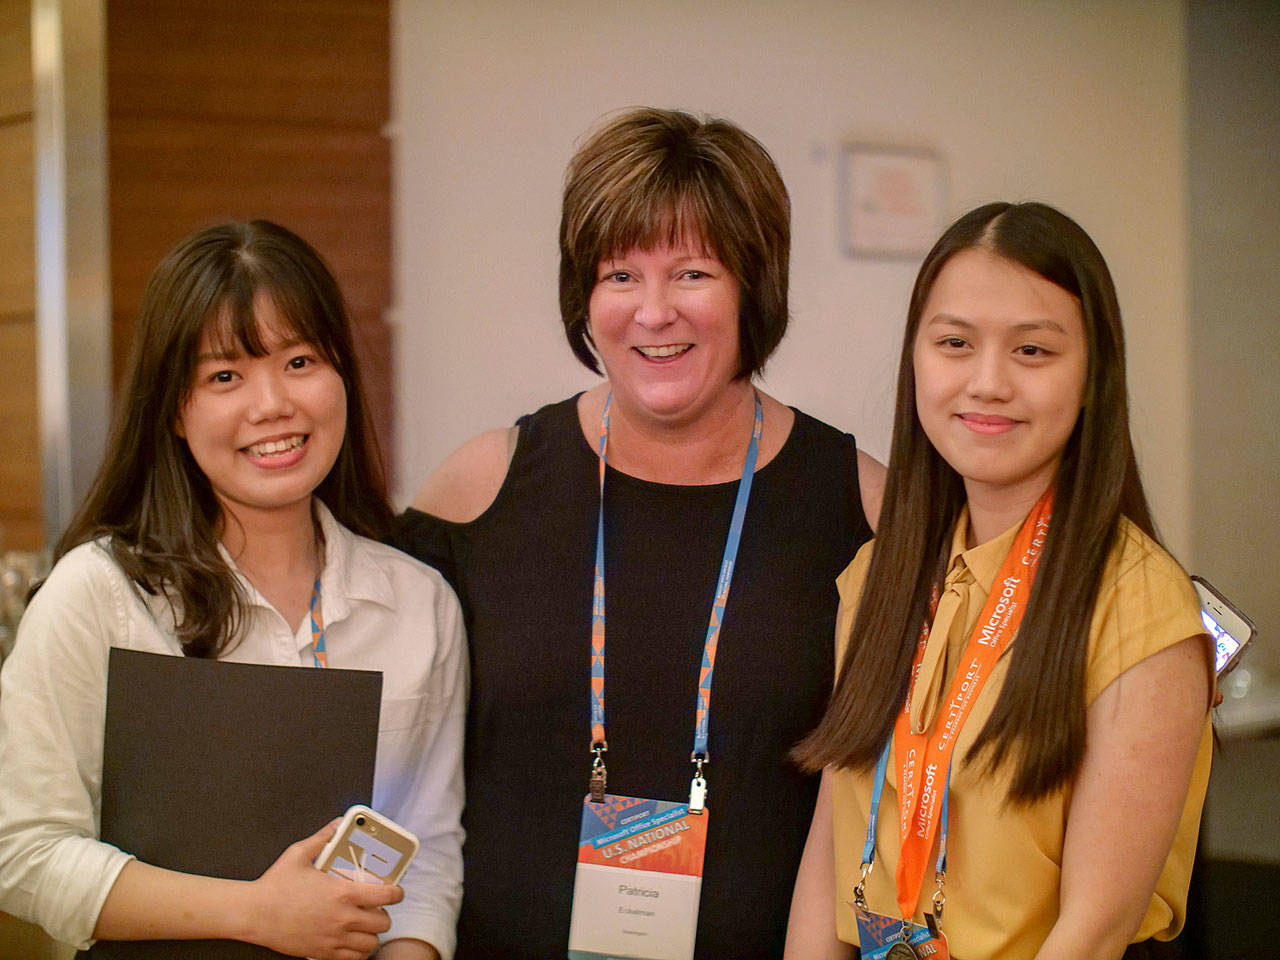 Auburn Mountainview High School graduate Linh Nguyen, far right, accepts her award, accompanied by her sister Nhi, left, who also competed in the Microsoft Office Specialist (MOS) U.S.National Championship, and their teacher, Patricia Eckelman. COURTESY PHOTO, Certiport